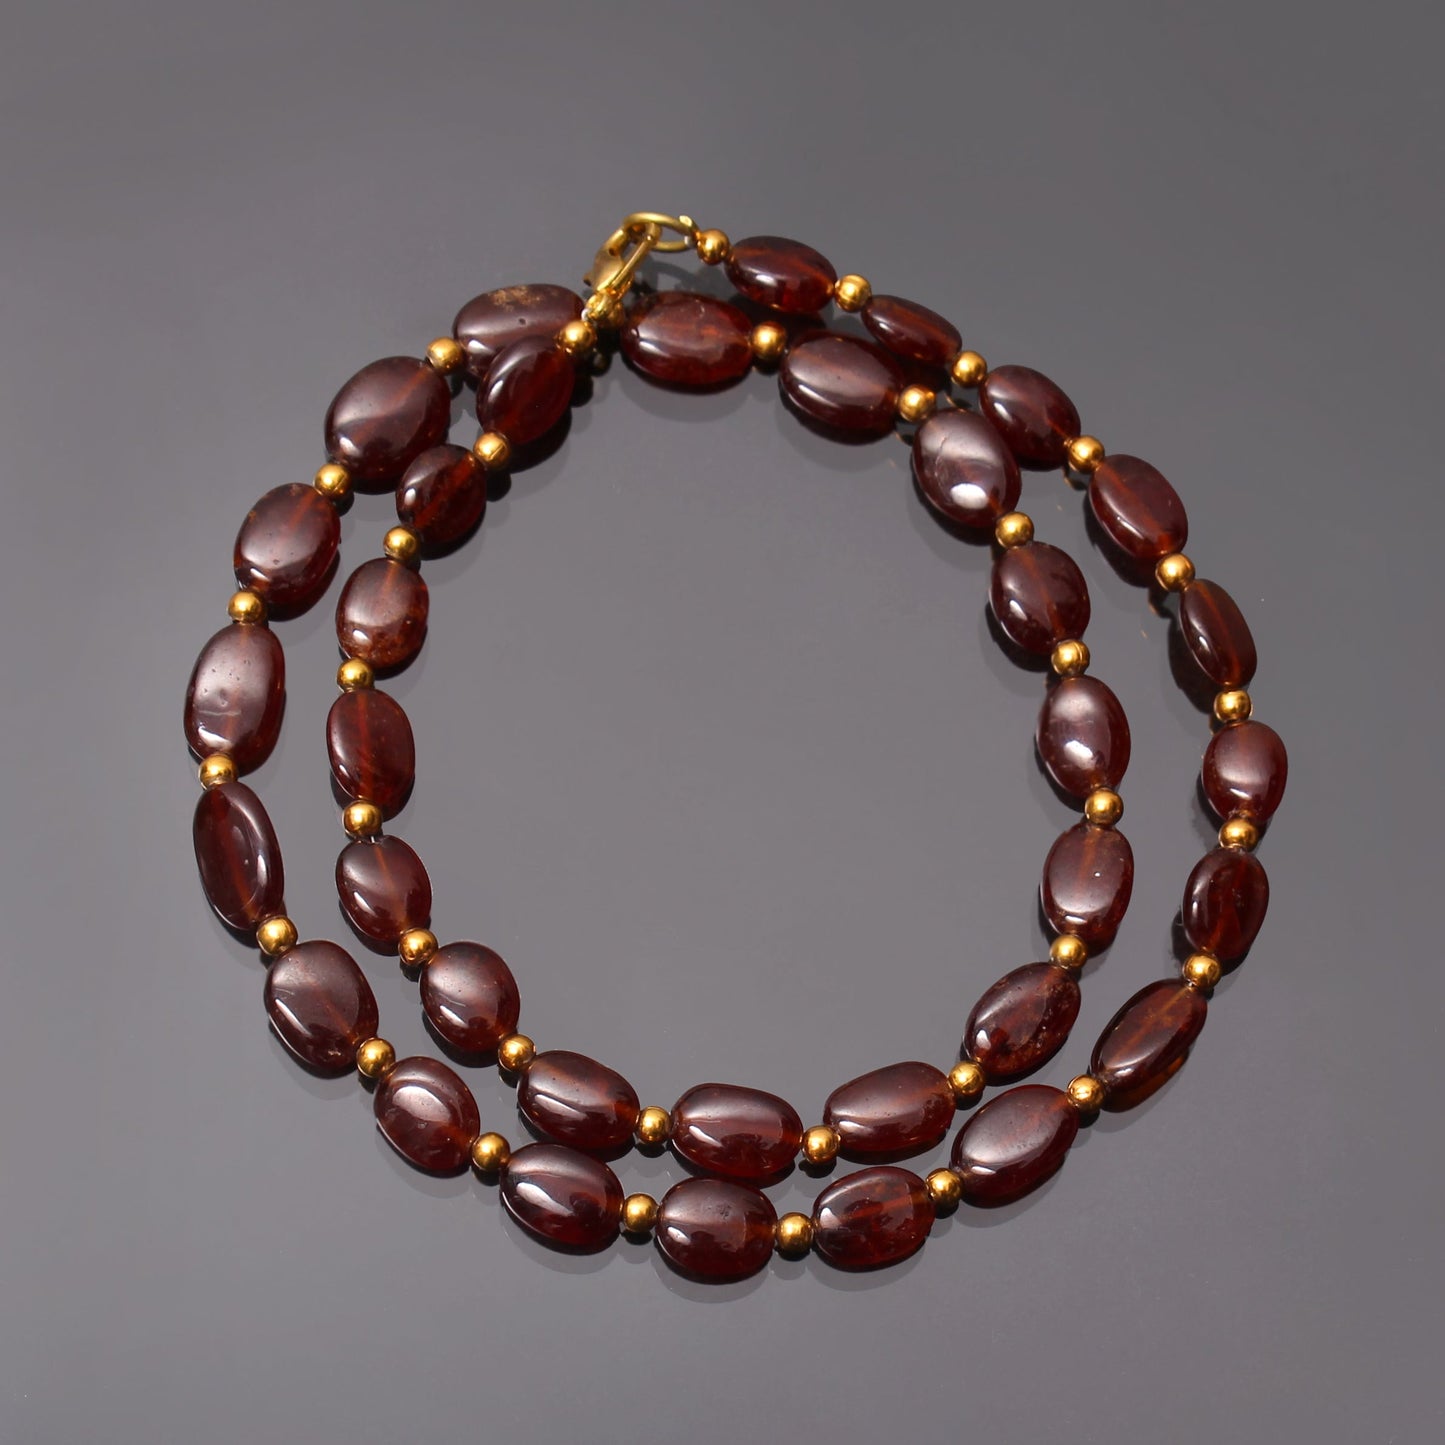 Natural Hessonite Beads Silver Necklace. GemsRush